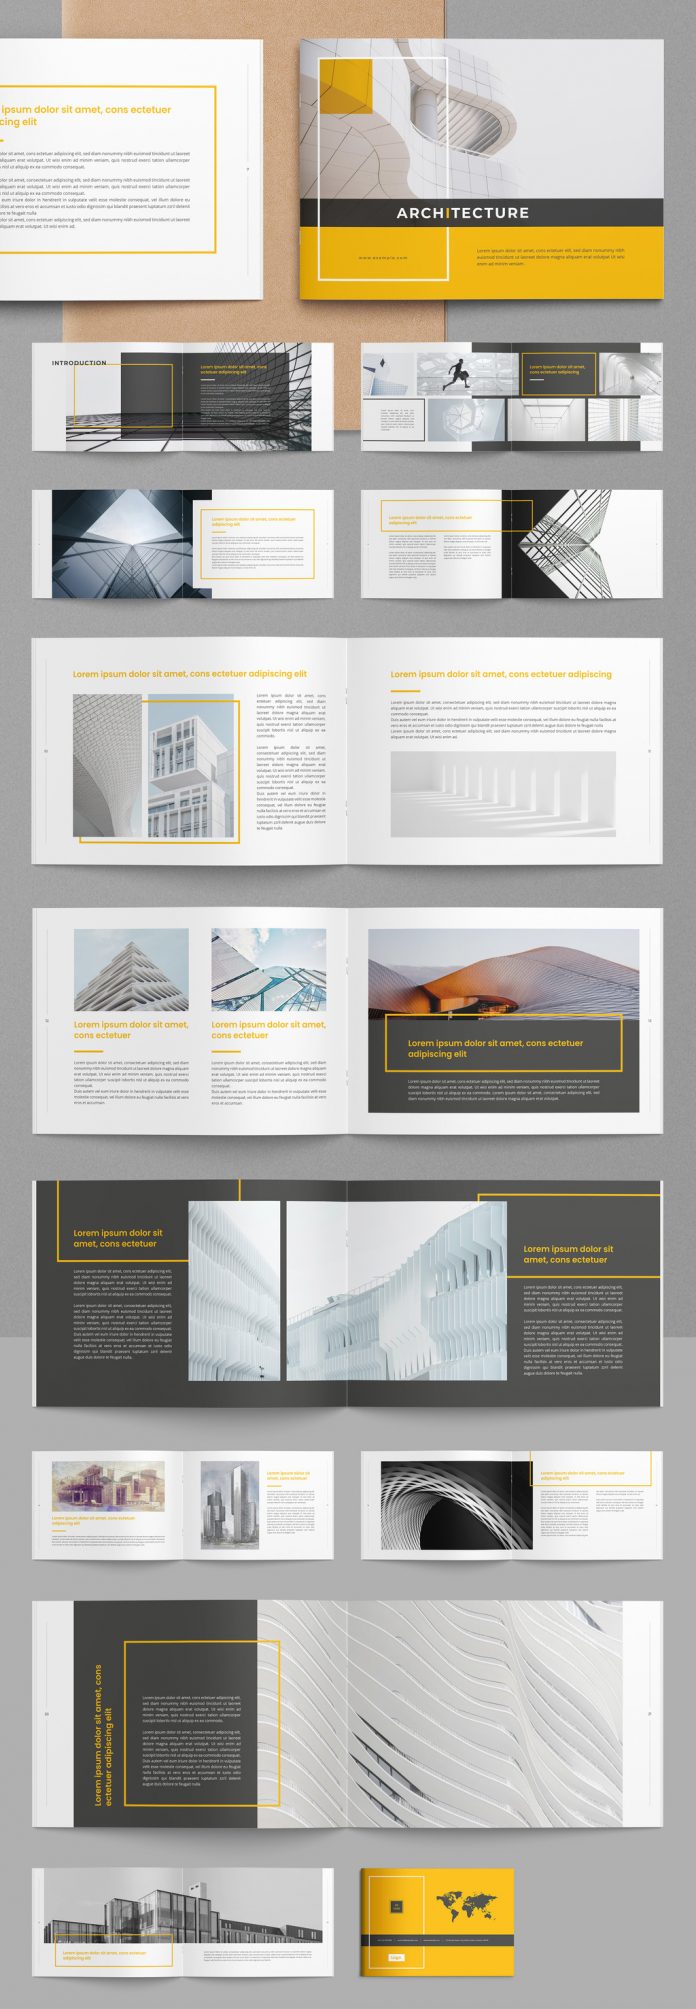 Architecture Brochure Layout with Yellow Accents.